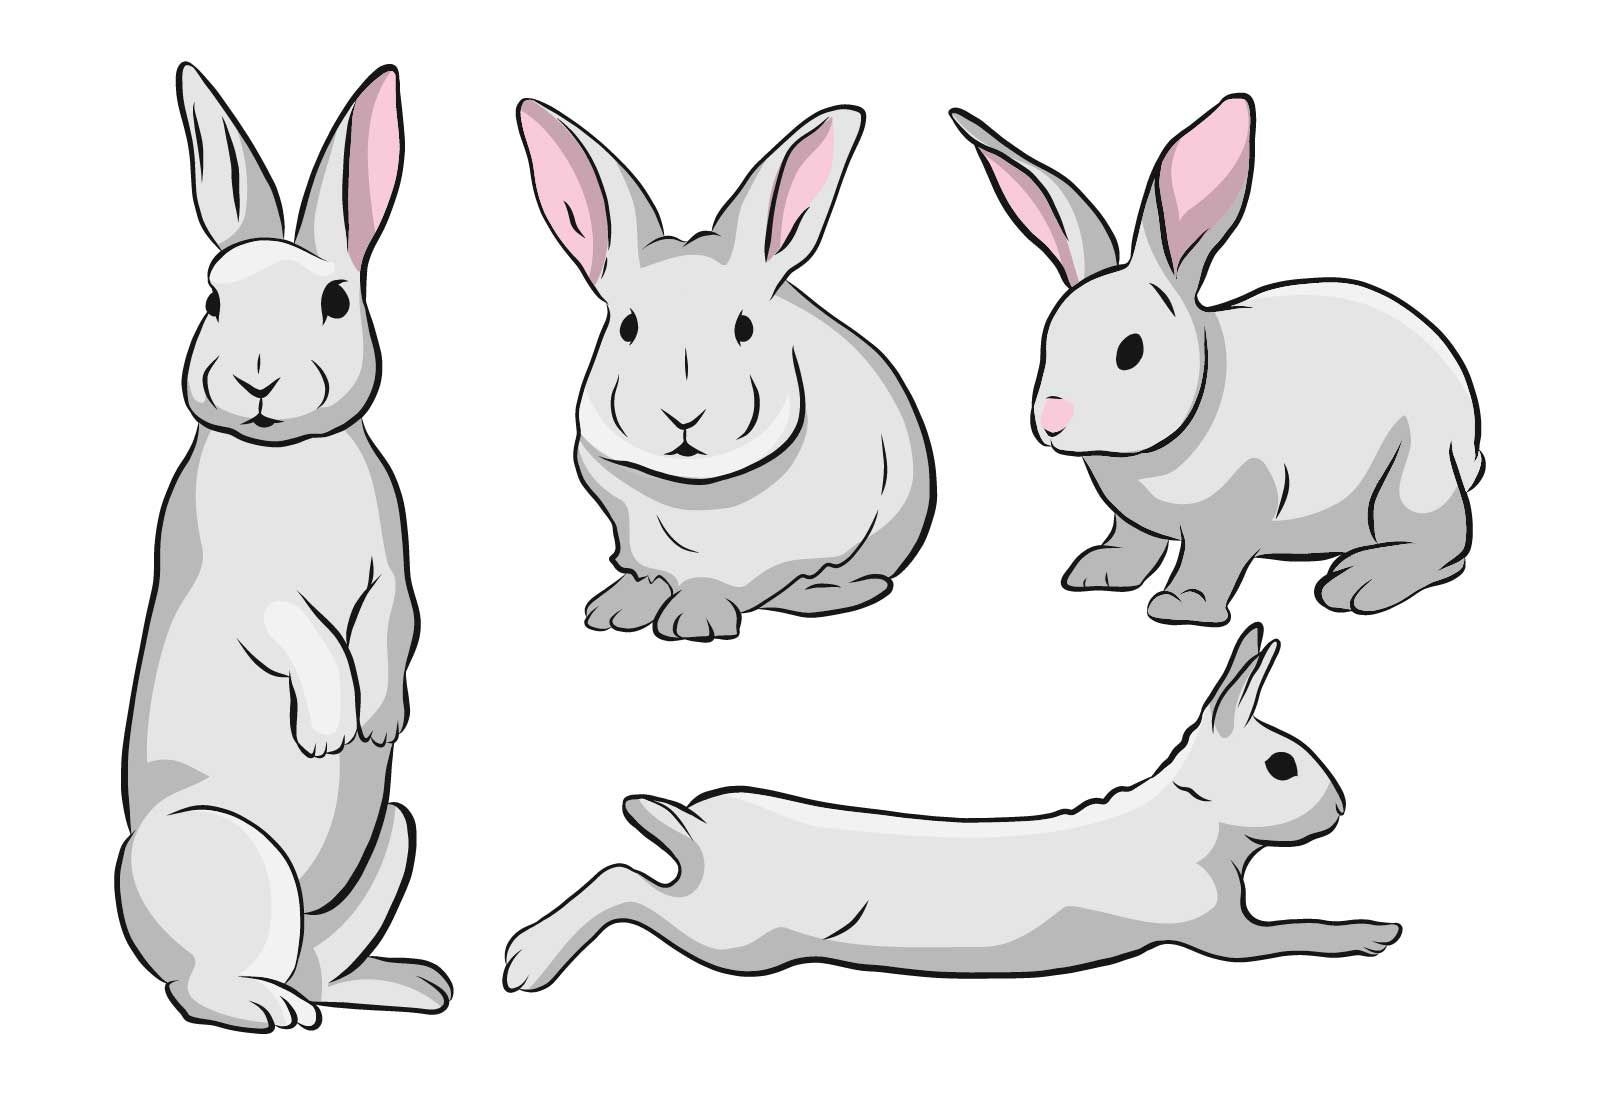 Learn how to draw a cute Rabbit - EASY TO DRAW EVERYTHING